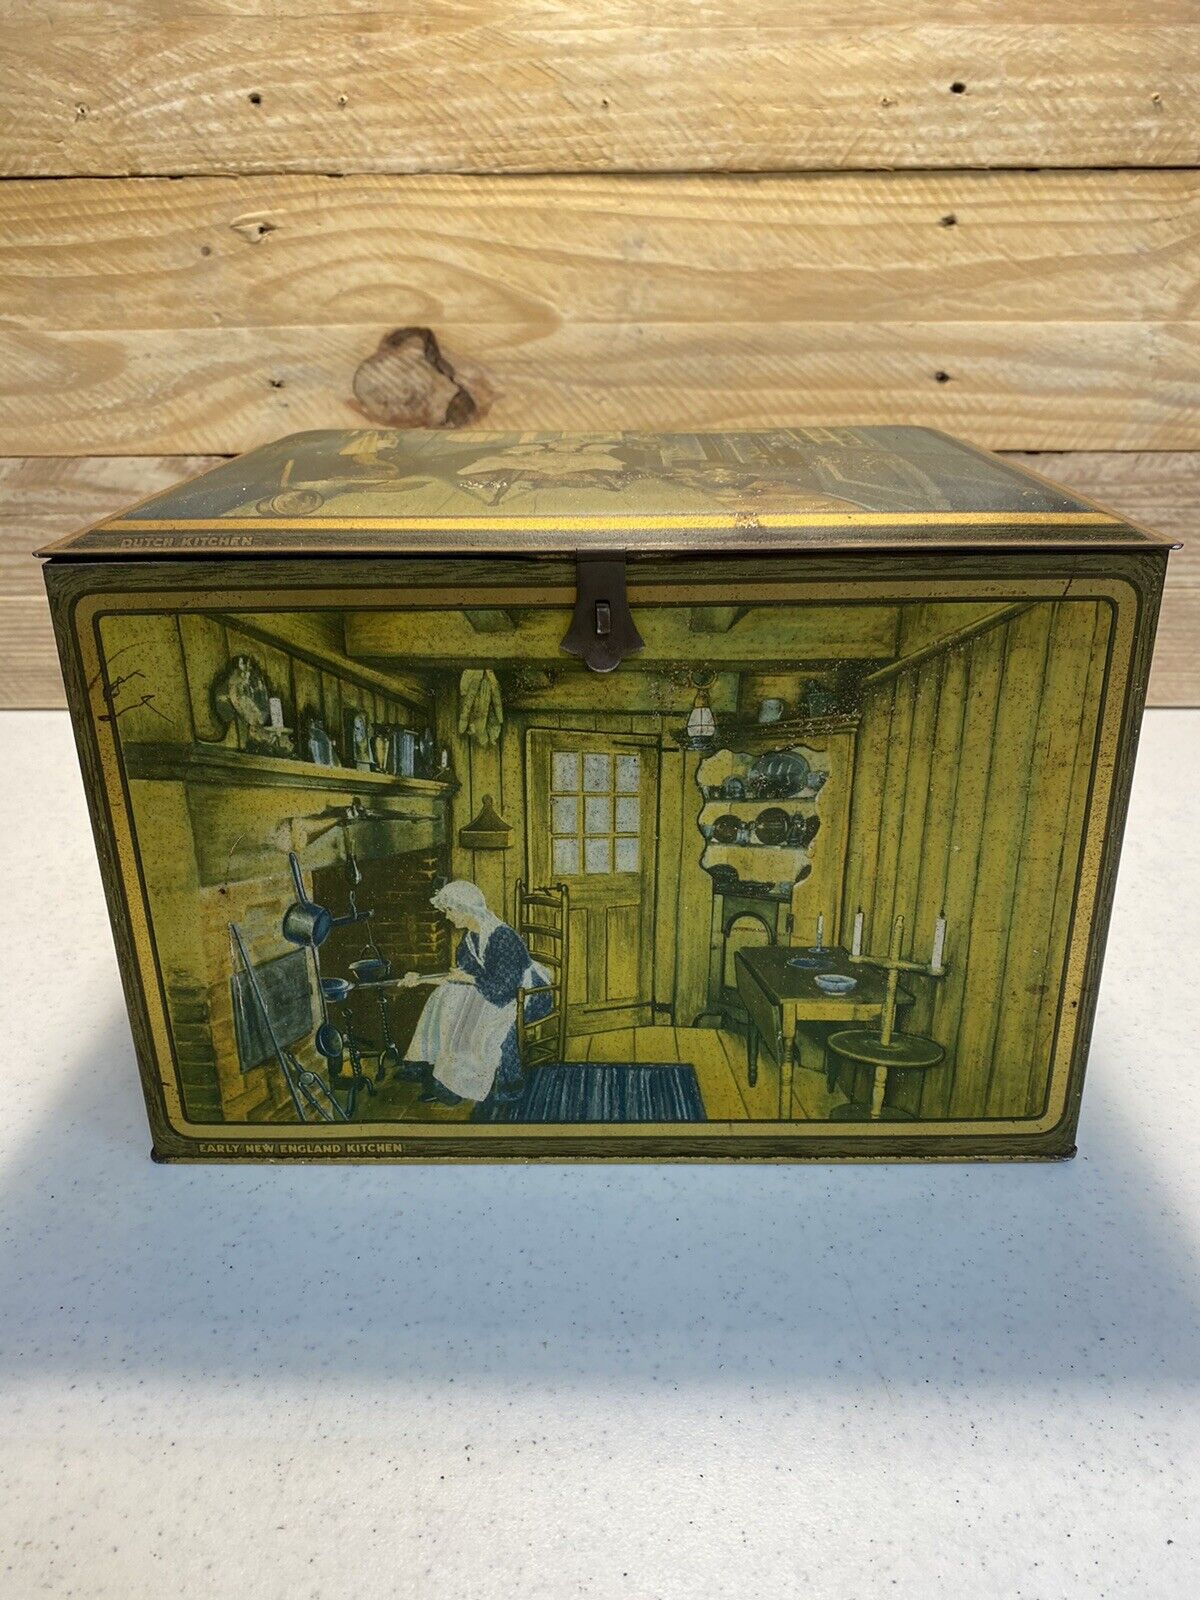 Antique Cano Biscuit Tin With Early Kitchen Scenes